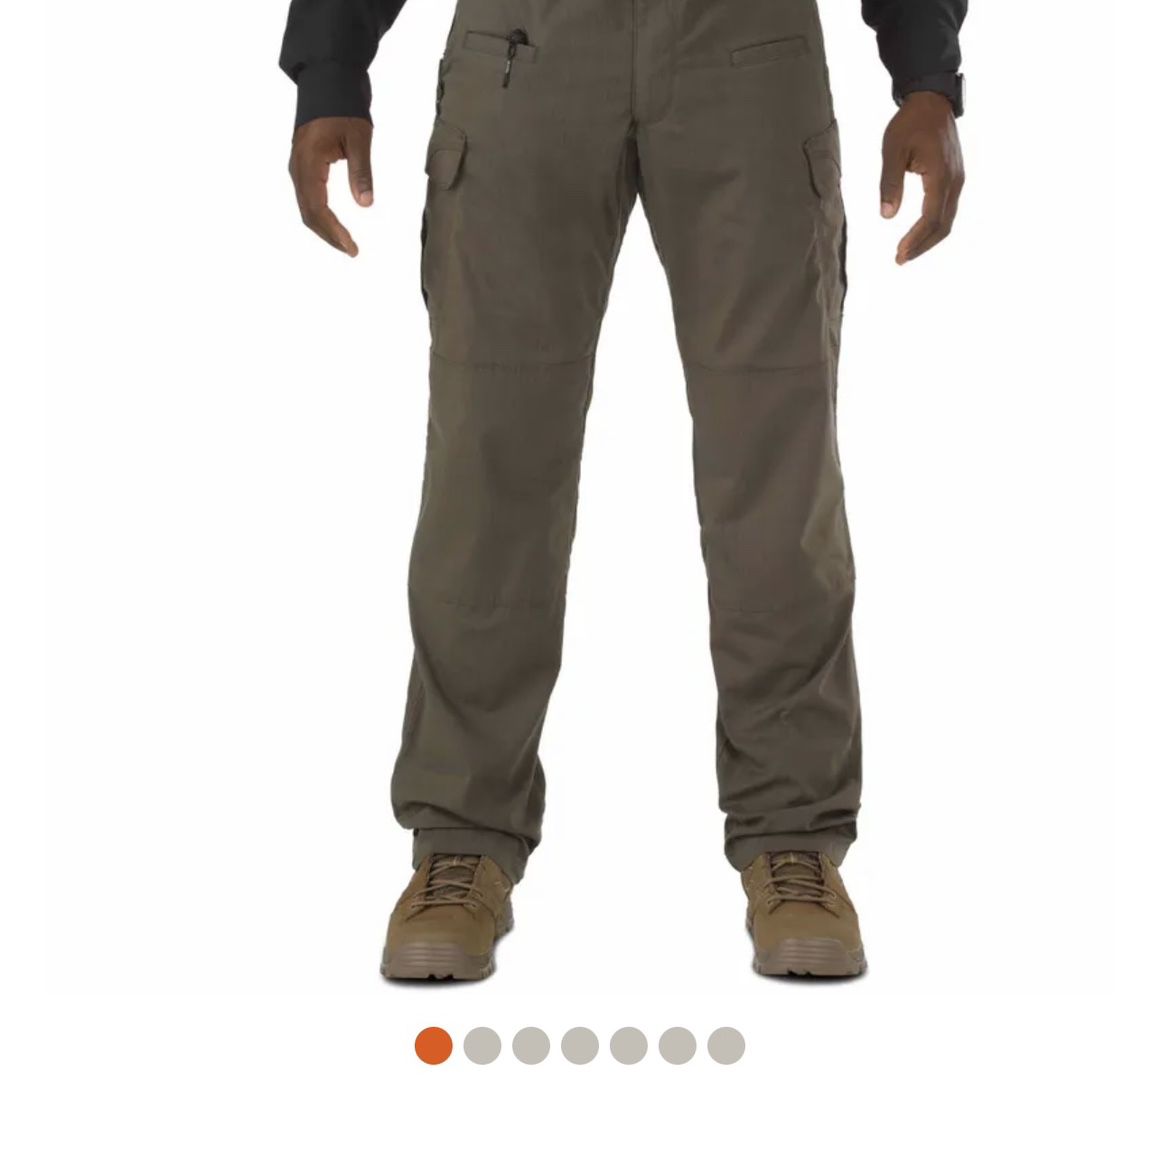 4 PAIRS OF 5.11 TACTICAL PANTS